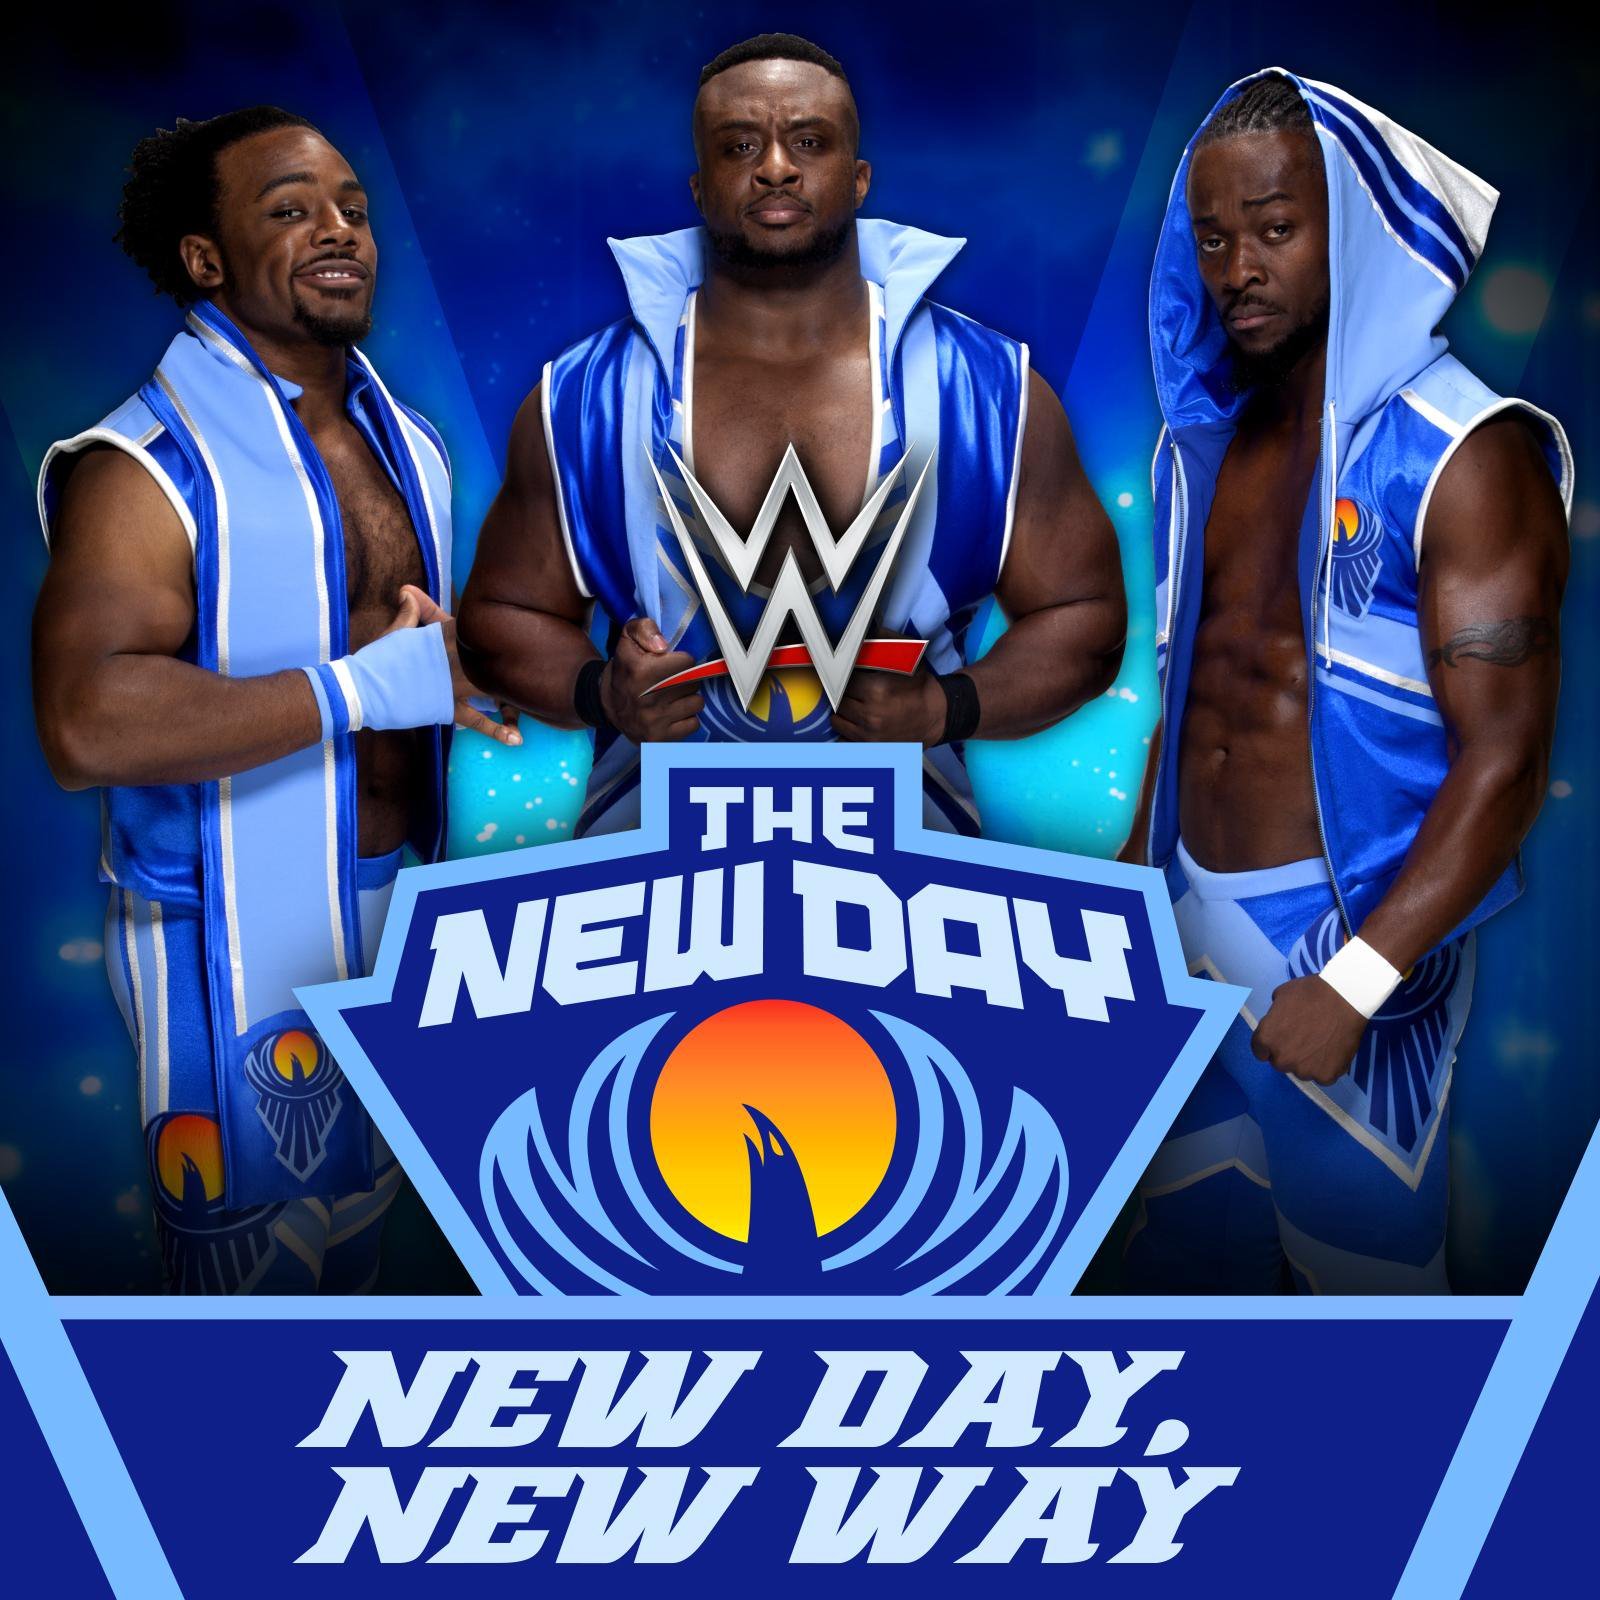 New day new way. New Day WWE. New Day New. New Day картинки. Days of the New Days of the New.